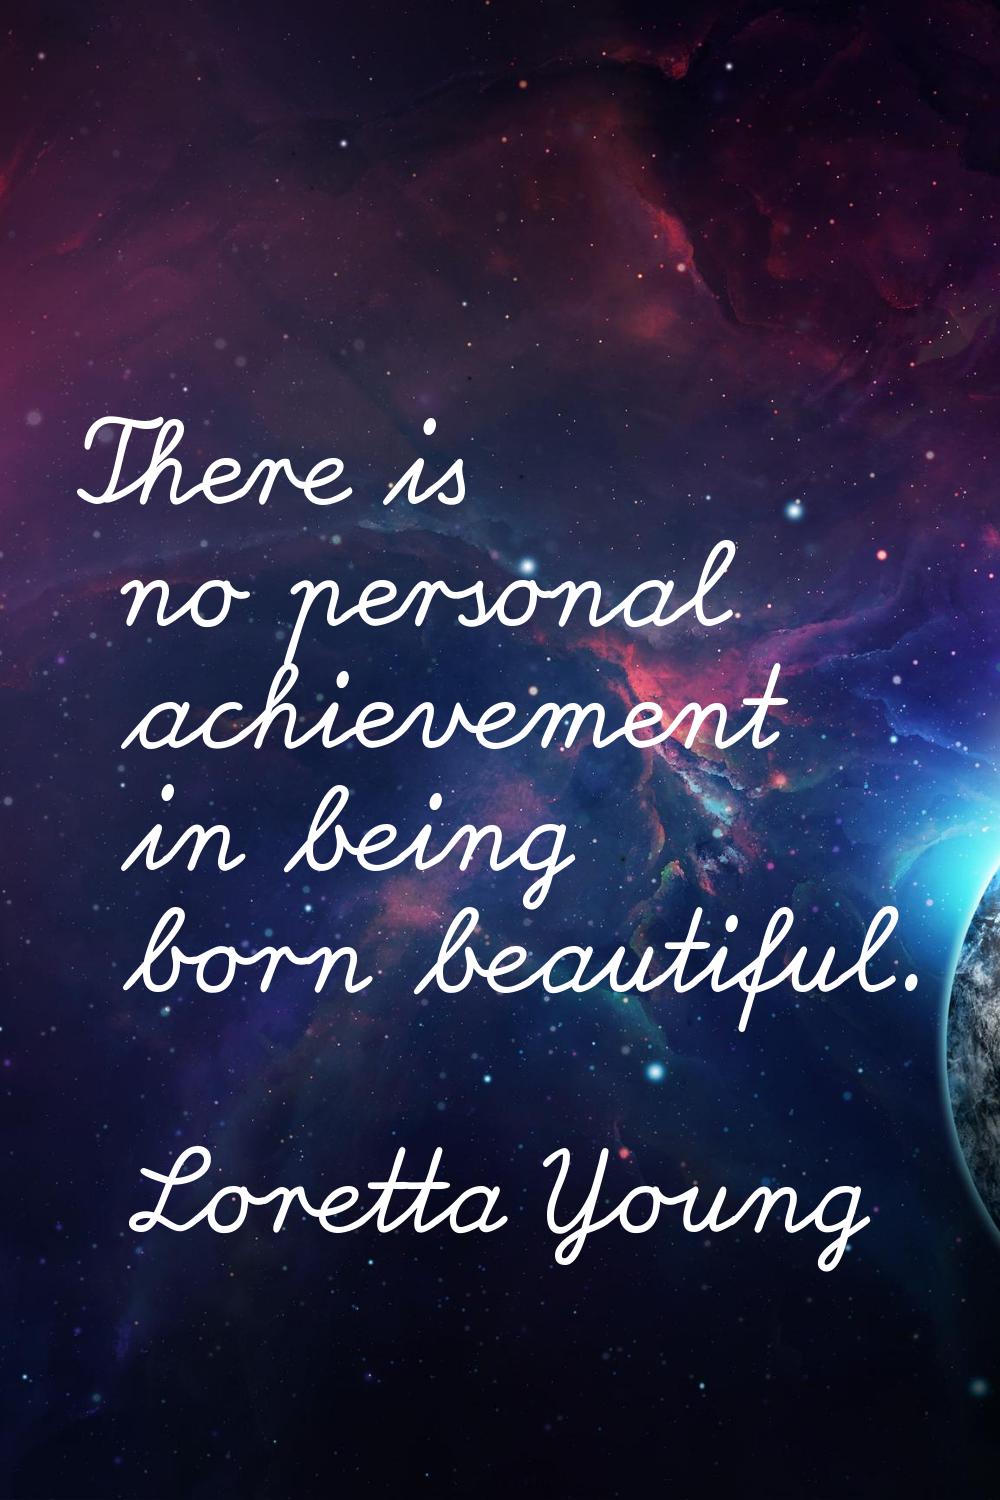 There is no personal achievement in being born beautiful.